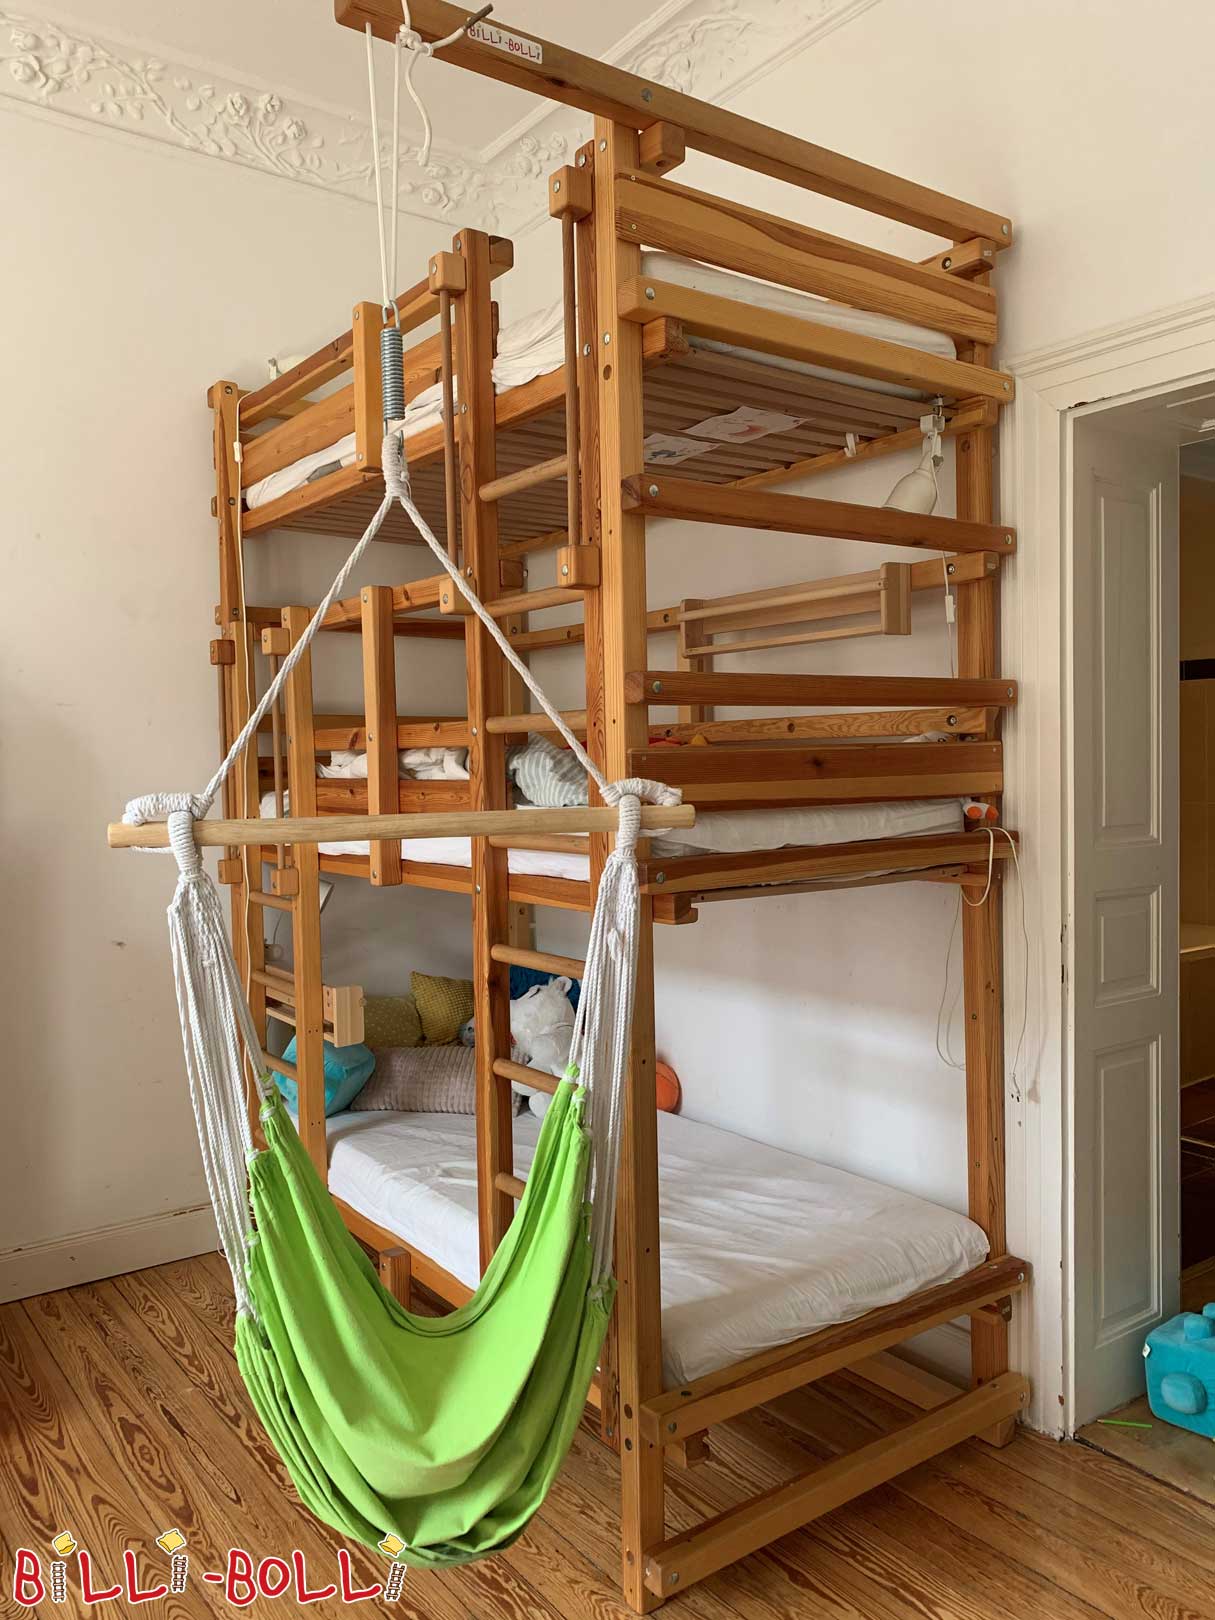 Kids Beds Extraordinary And Unique, Jungle Bunk Bed